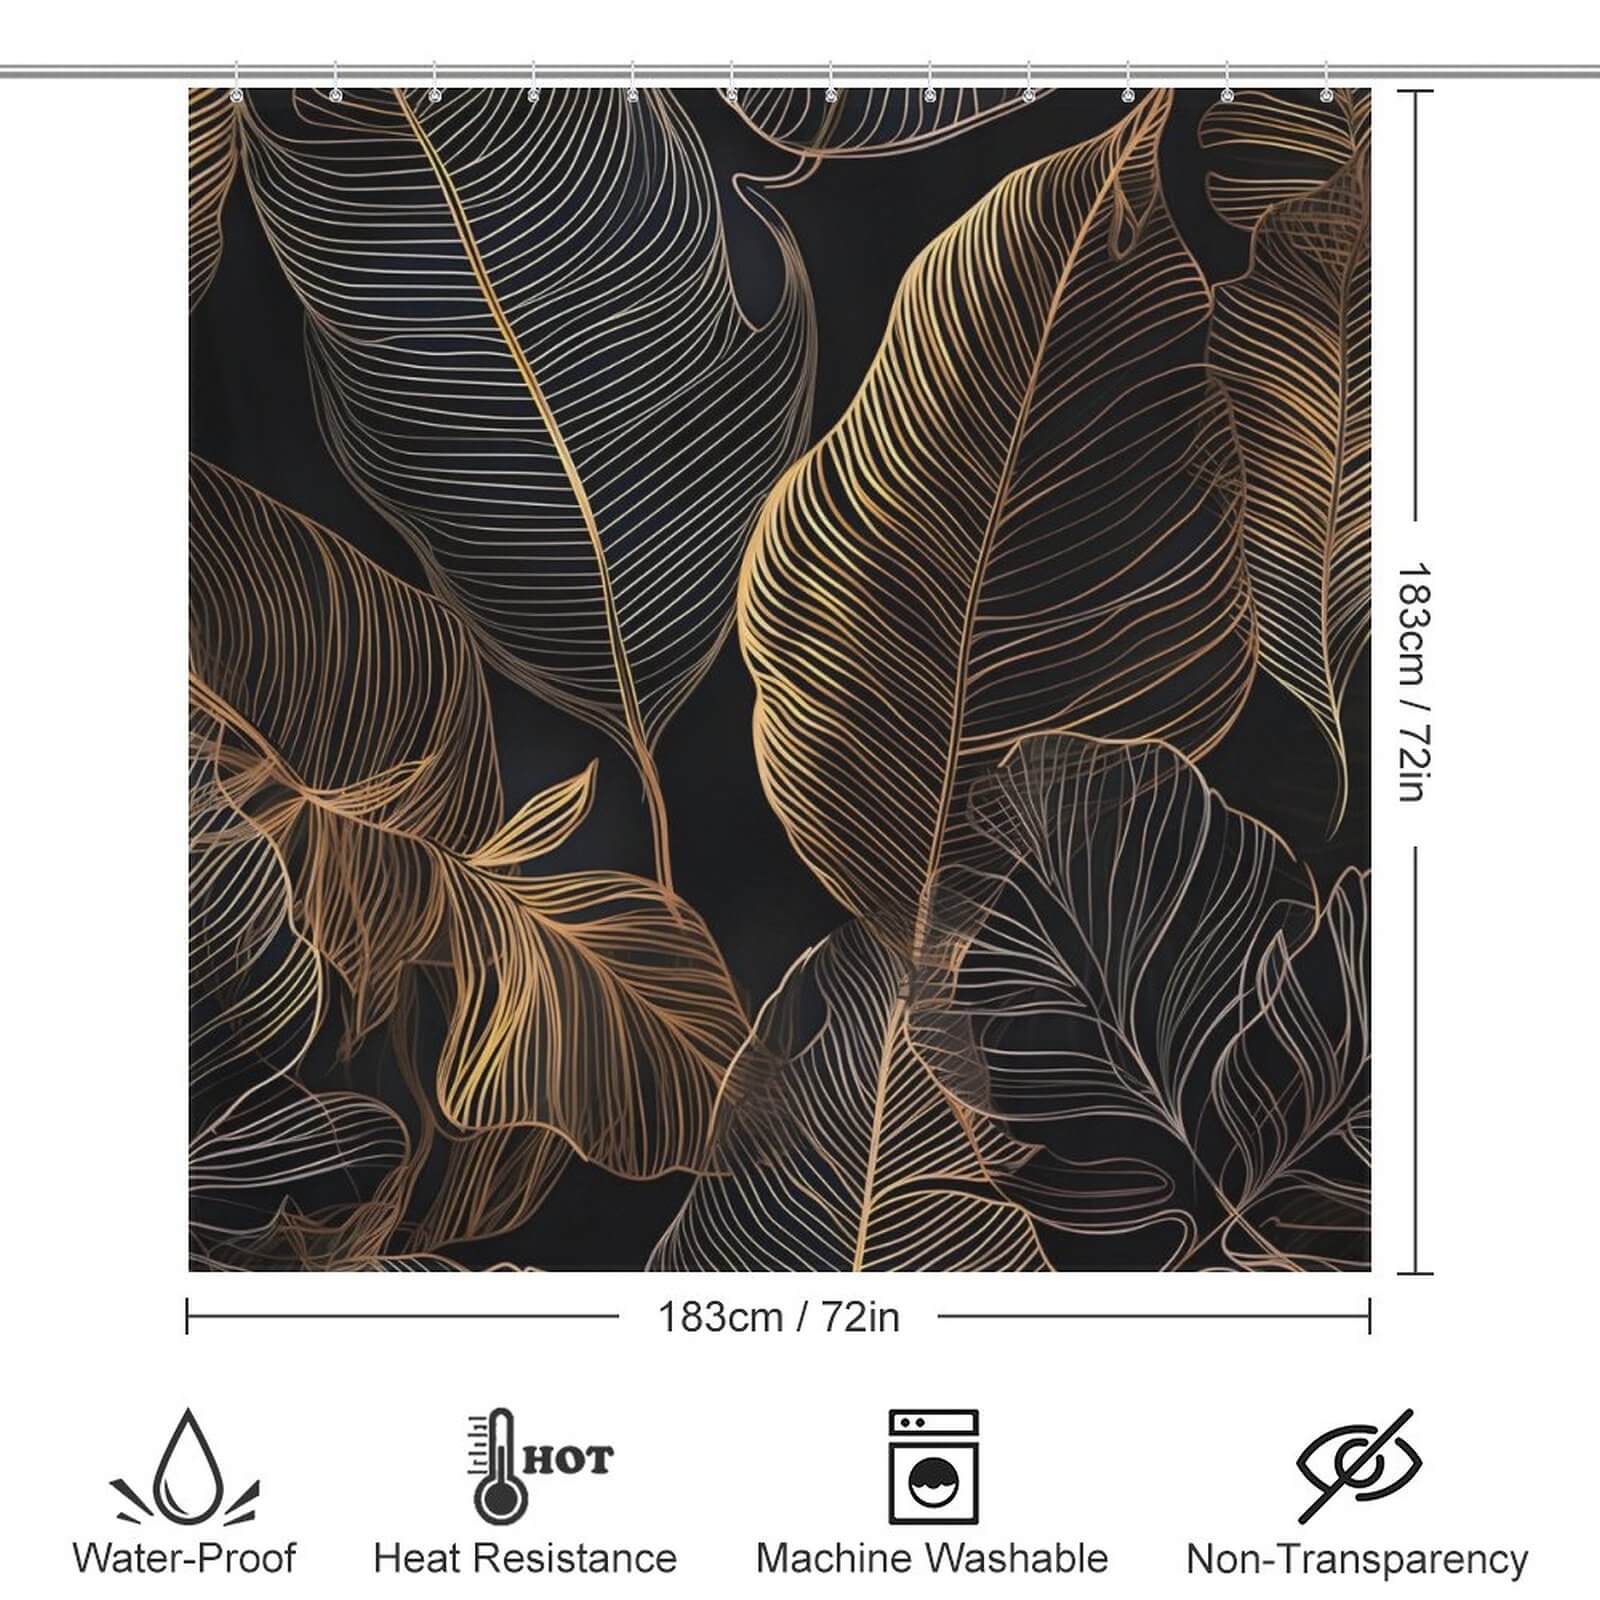 This waterproof Golden Tropical Leaves Jungle Shower Curtain-Cottoncat is a perfect addition to your bathroom decor.